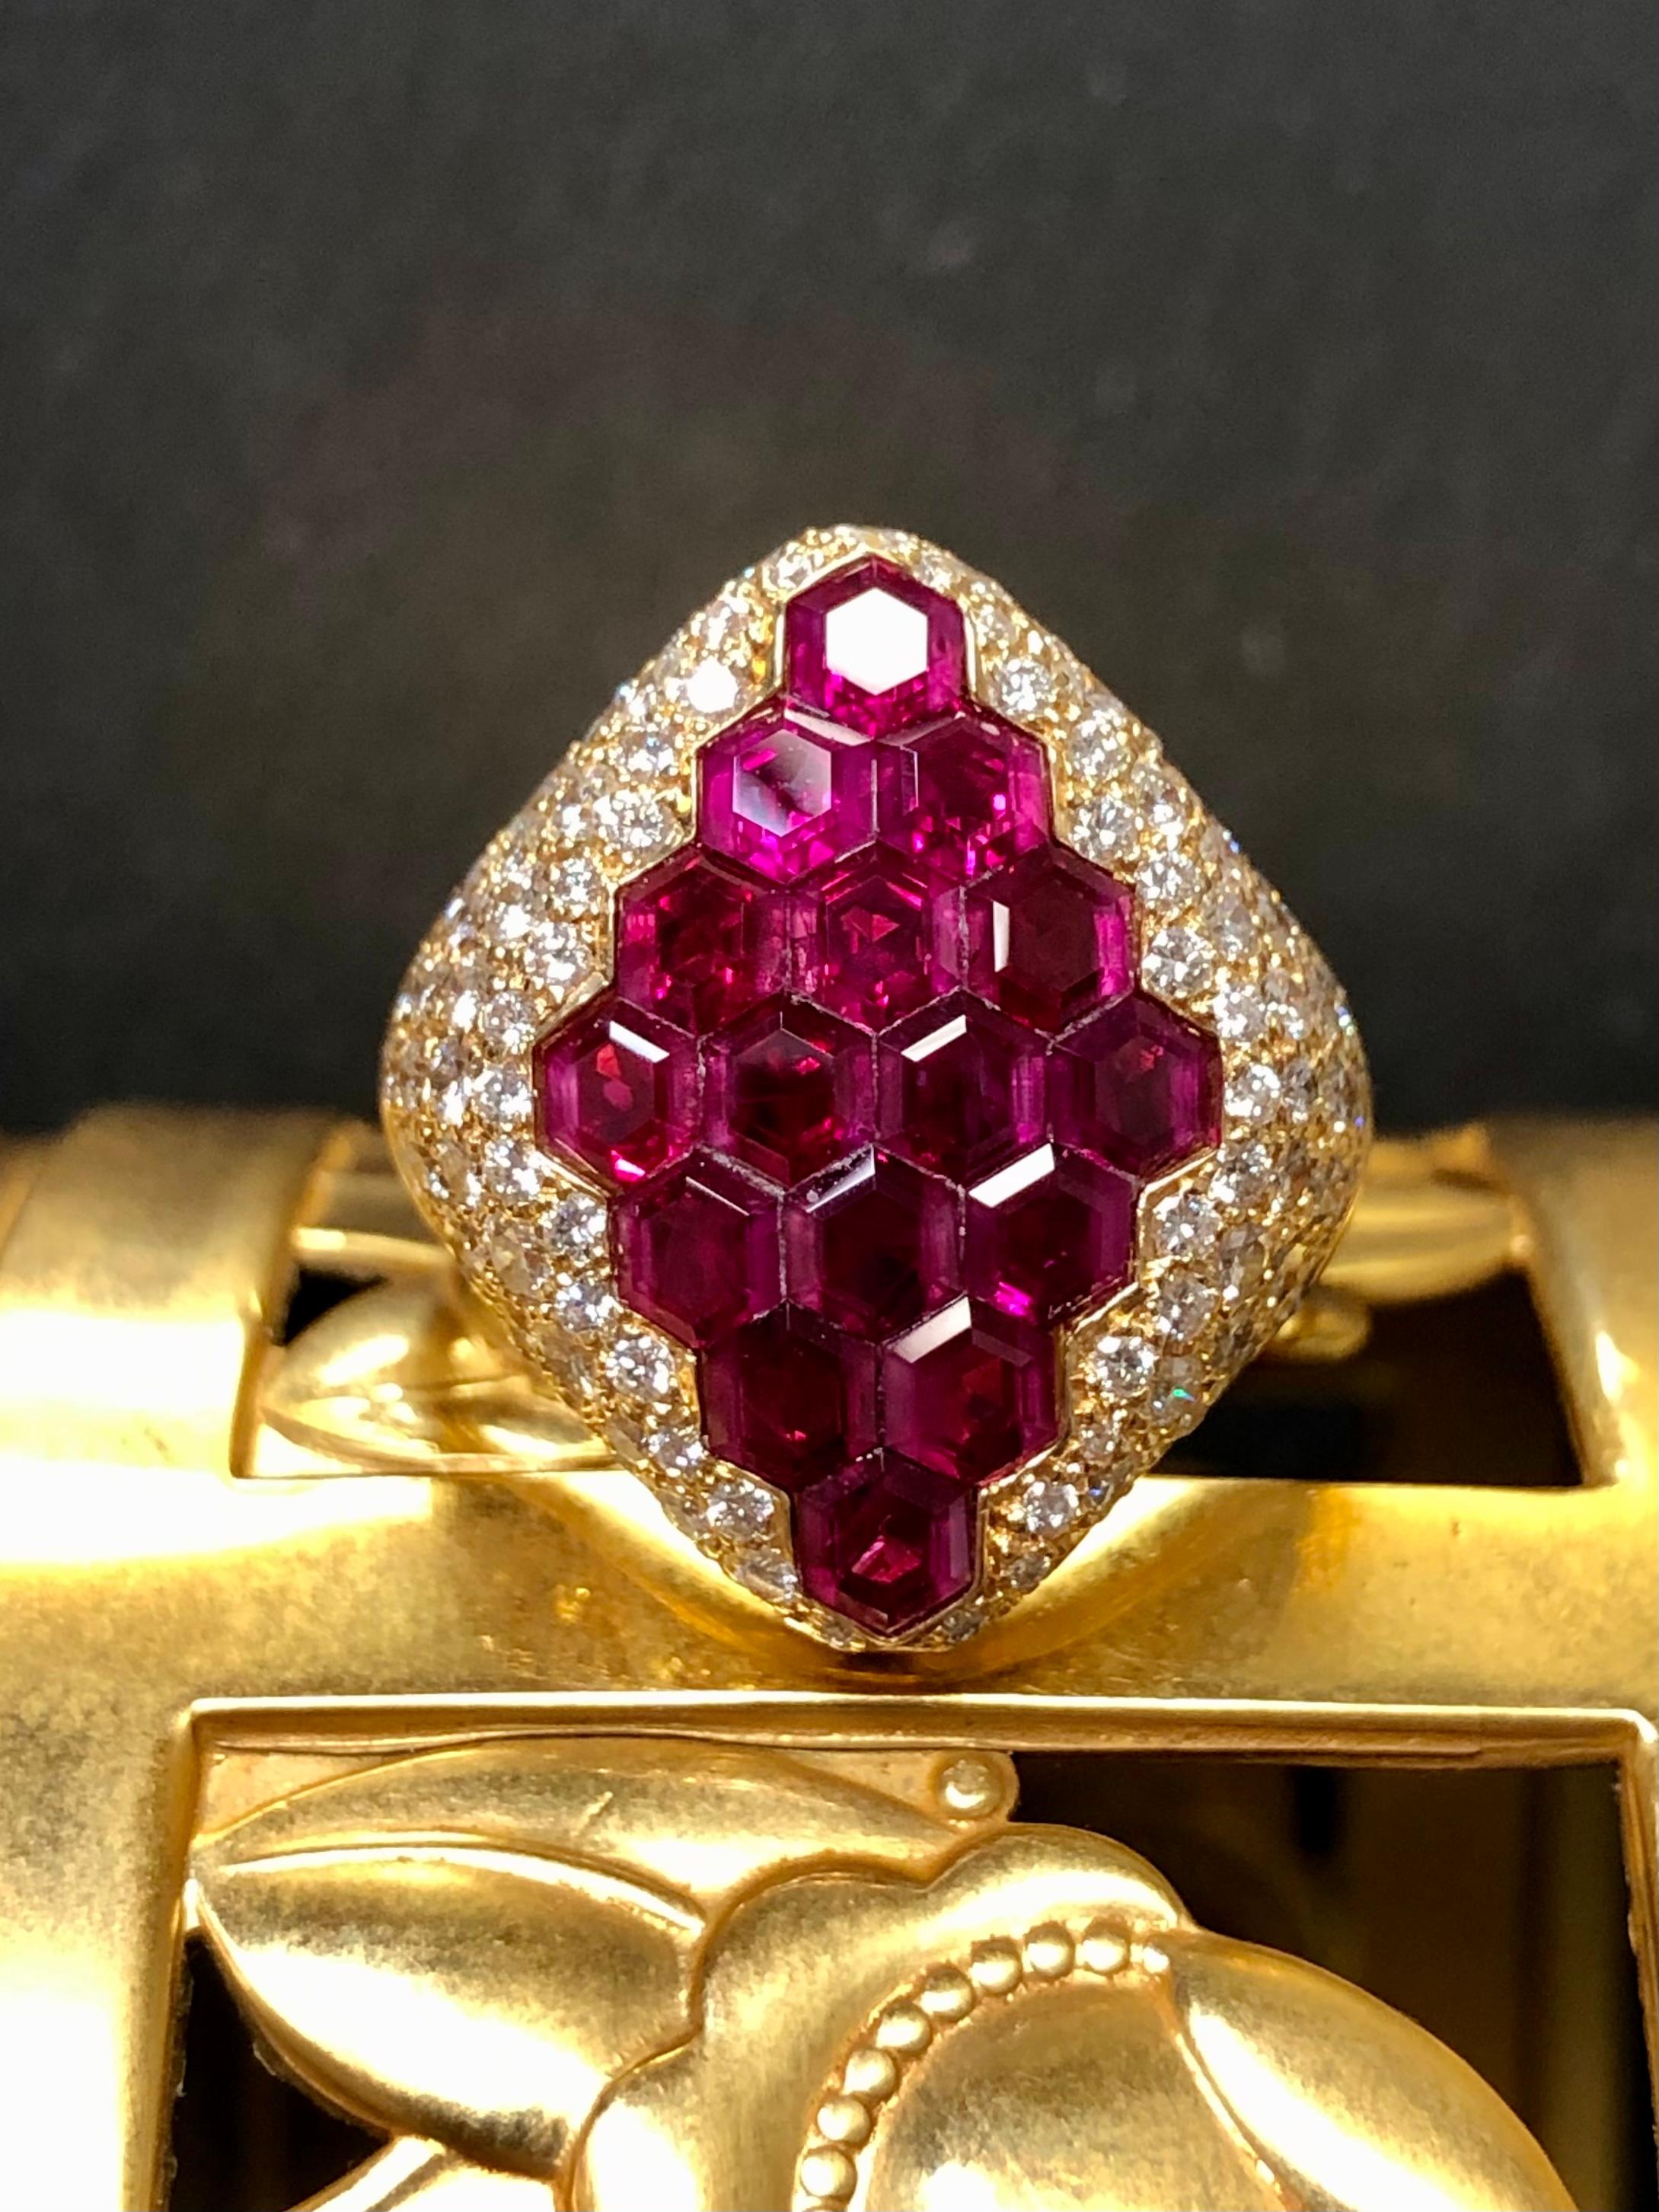 If you are a jewelry enthusiast then certainly you have seen invisibly set rubies before… But have you ever seen hexagonal cut invisibly set rubies? We haven’t! This ring is incredible and goes beyond regular stone setting. It’s a newer piece made